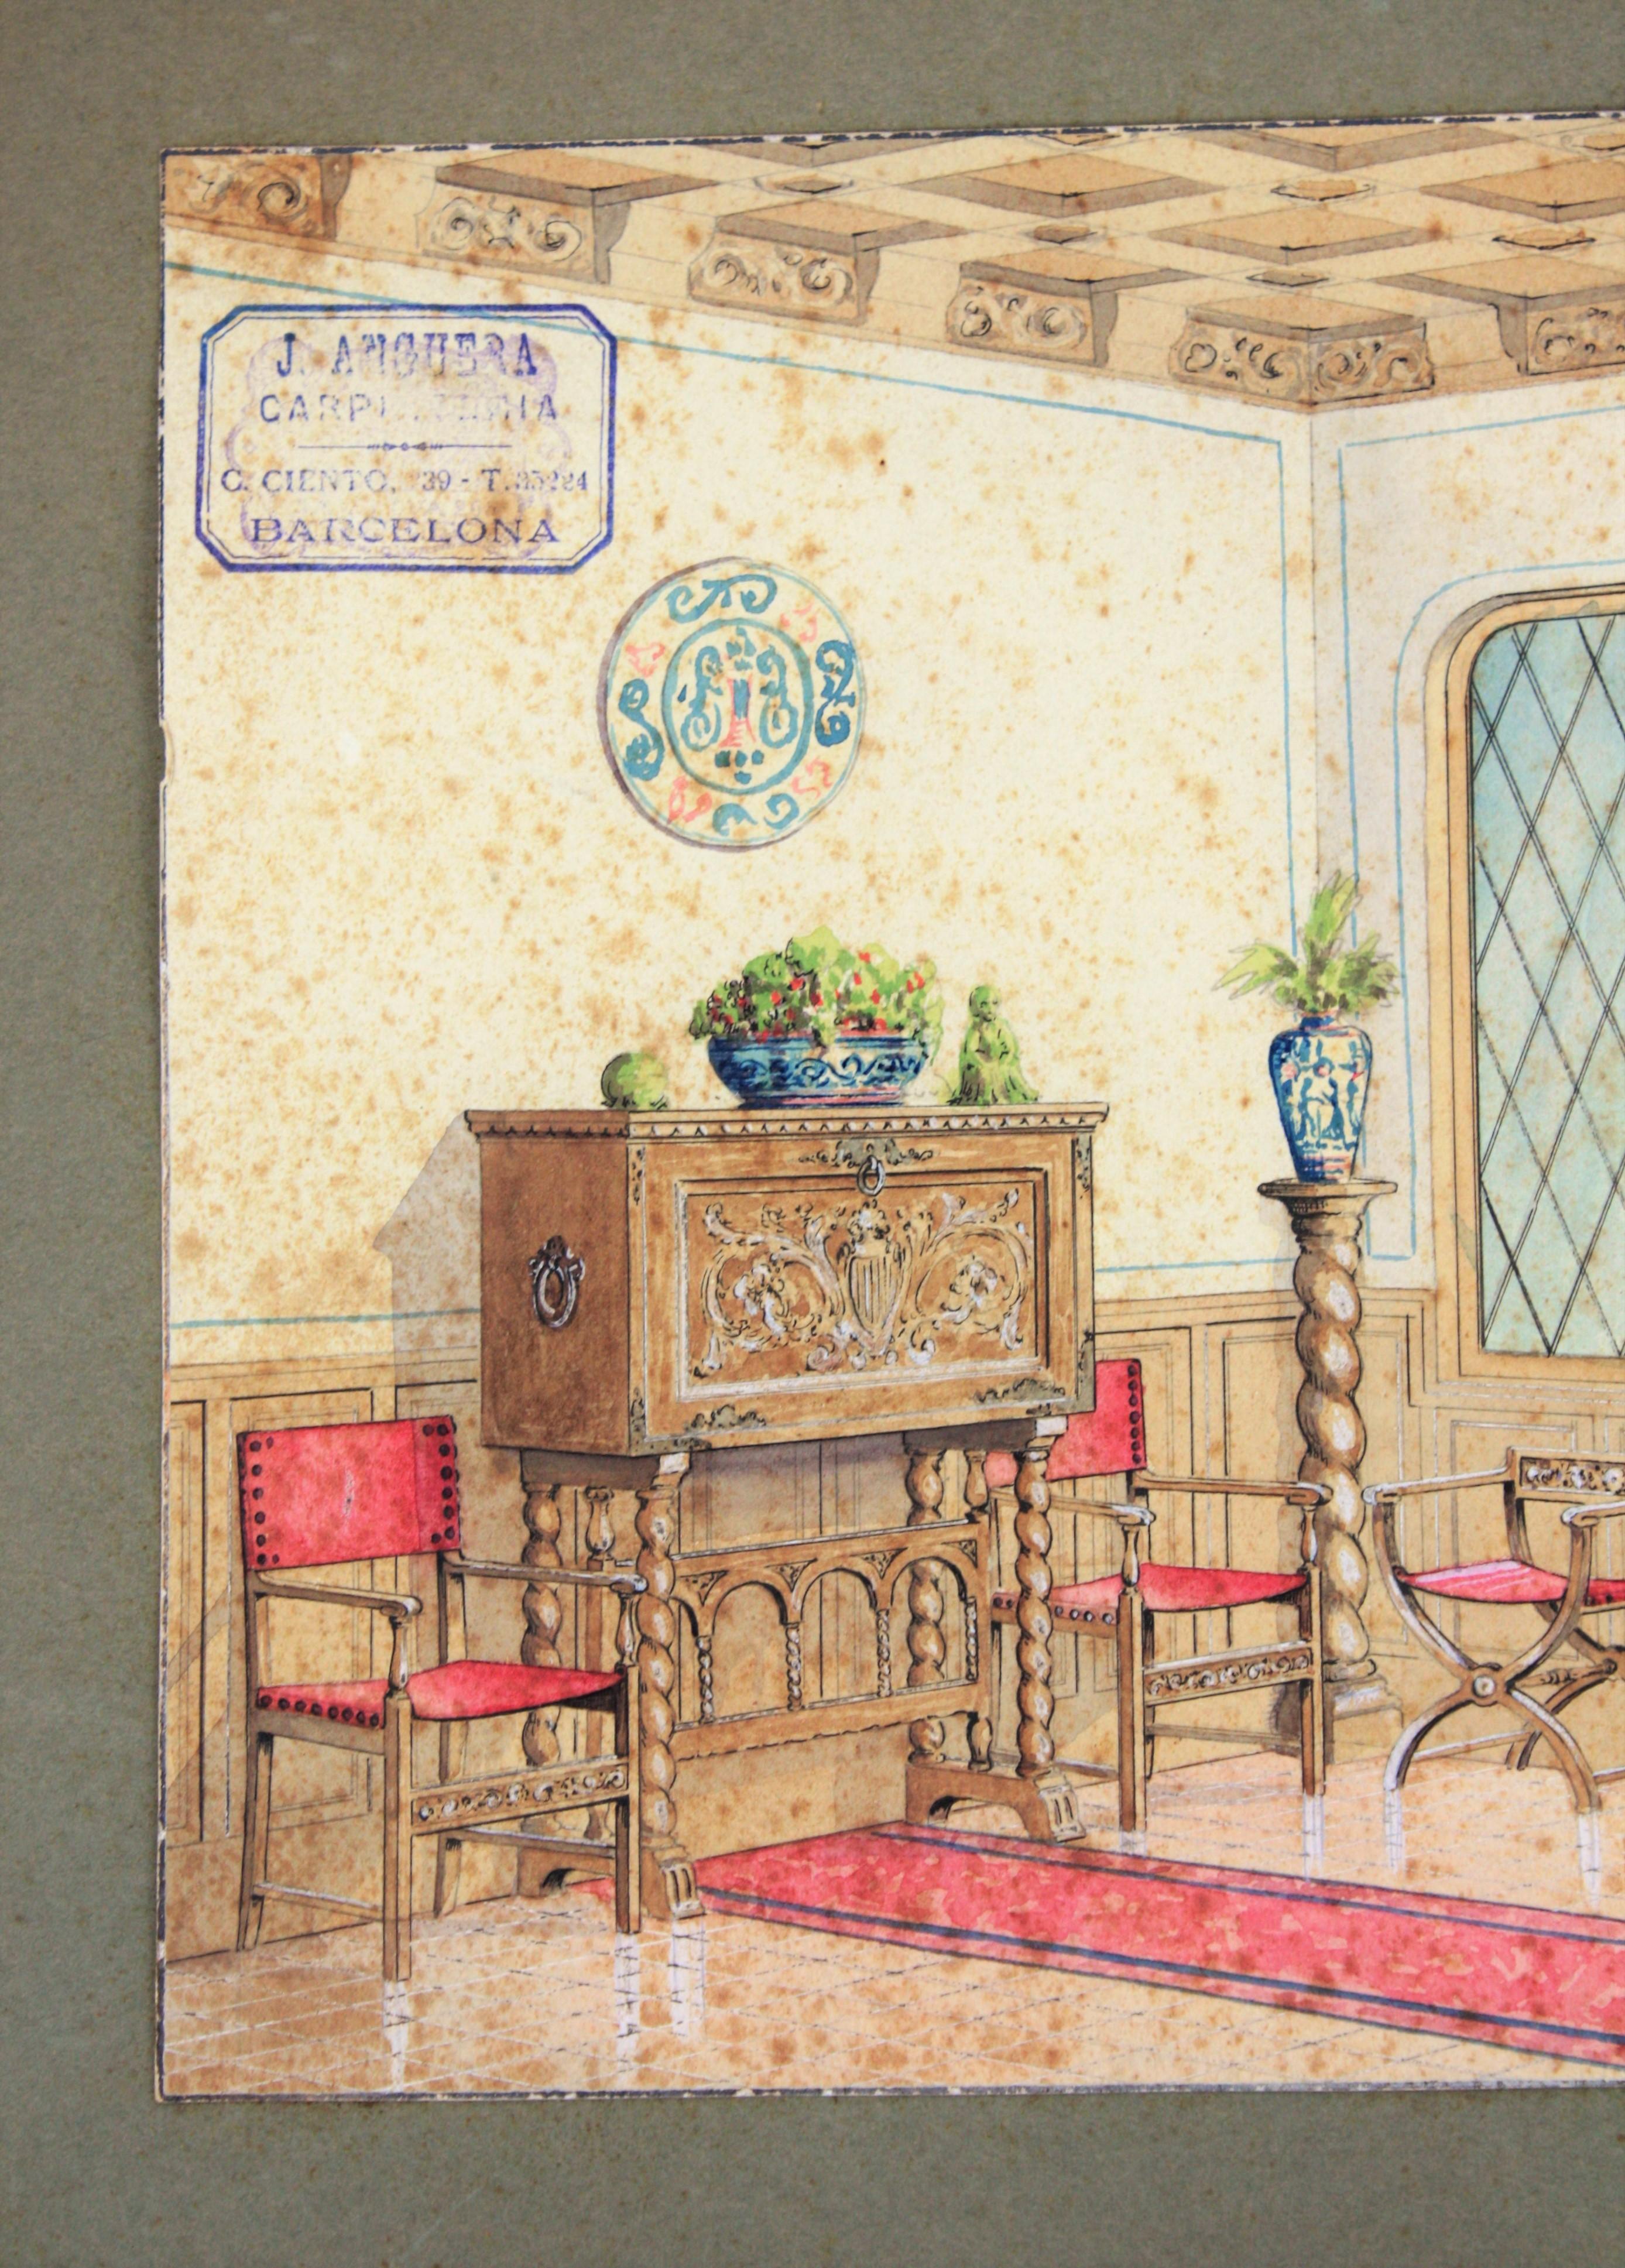 Spanish Colonial Indoor home scene. Original watercolor, ink and gouache drawing on vellum paper, Project for a home decoration. Cabinet maker archives stamp top Lef: 'J. Anguera. Carpintería. Barcelona' Number 7.
Individual size: 33.5cm W x 24cm